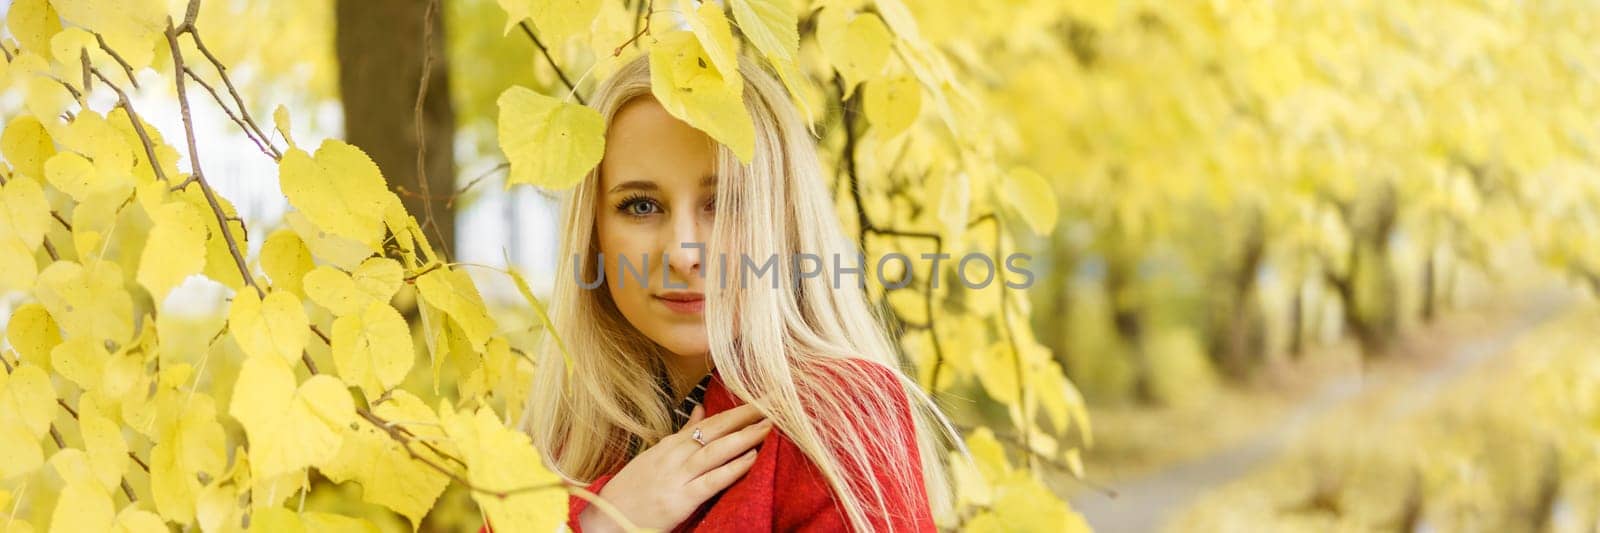 A young blonde woman walks around the autumn city in a red coat. The concept of urban style and lifestyle. Autumn portrait. by Annu1tochka